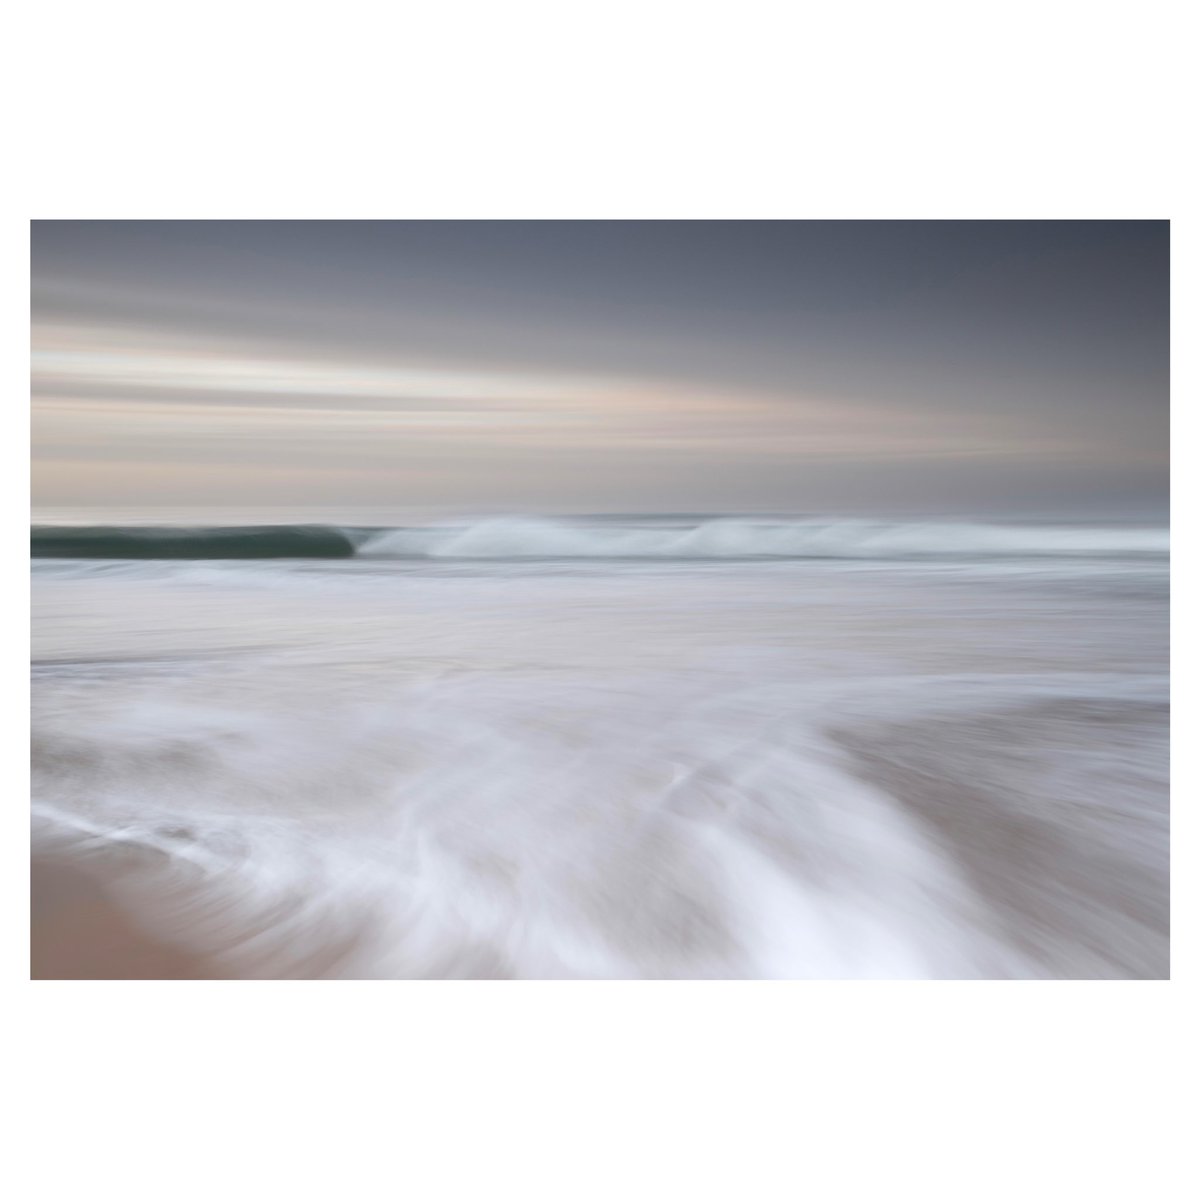 Swash & Swooshery. 

Just home from a week of #Aberdeenshire #beaches this one is before everything turned VERY pink! 

#handheld #icm #photograghy